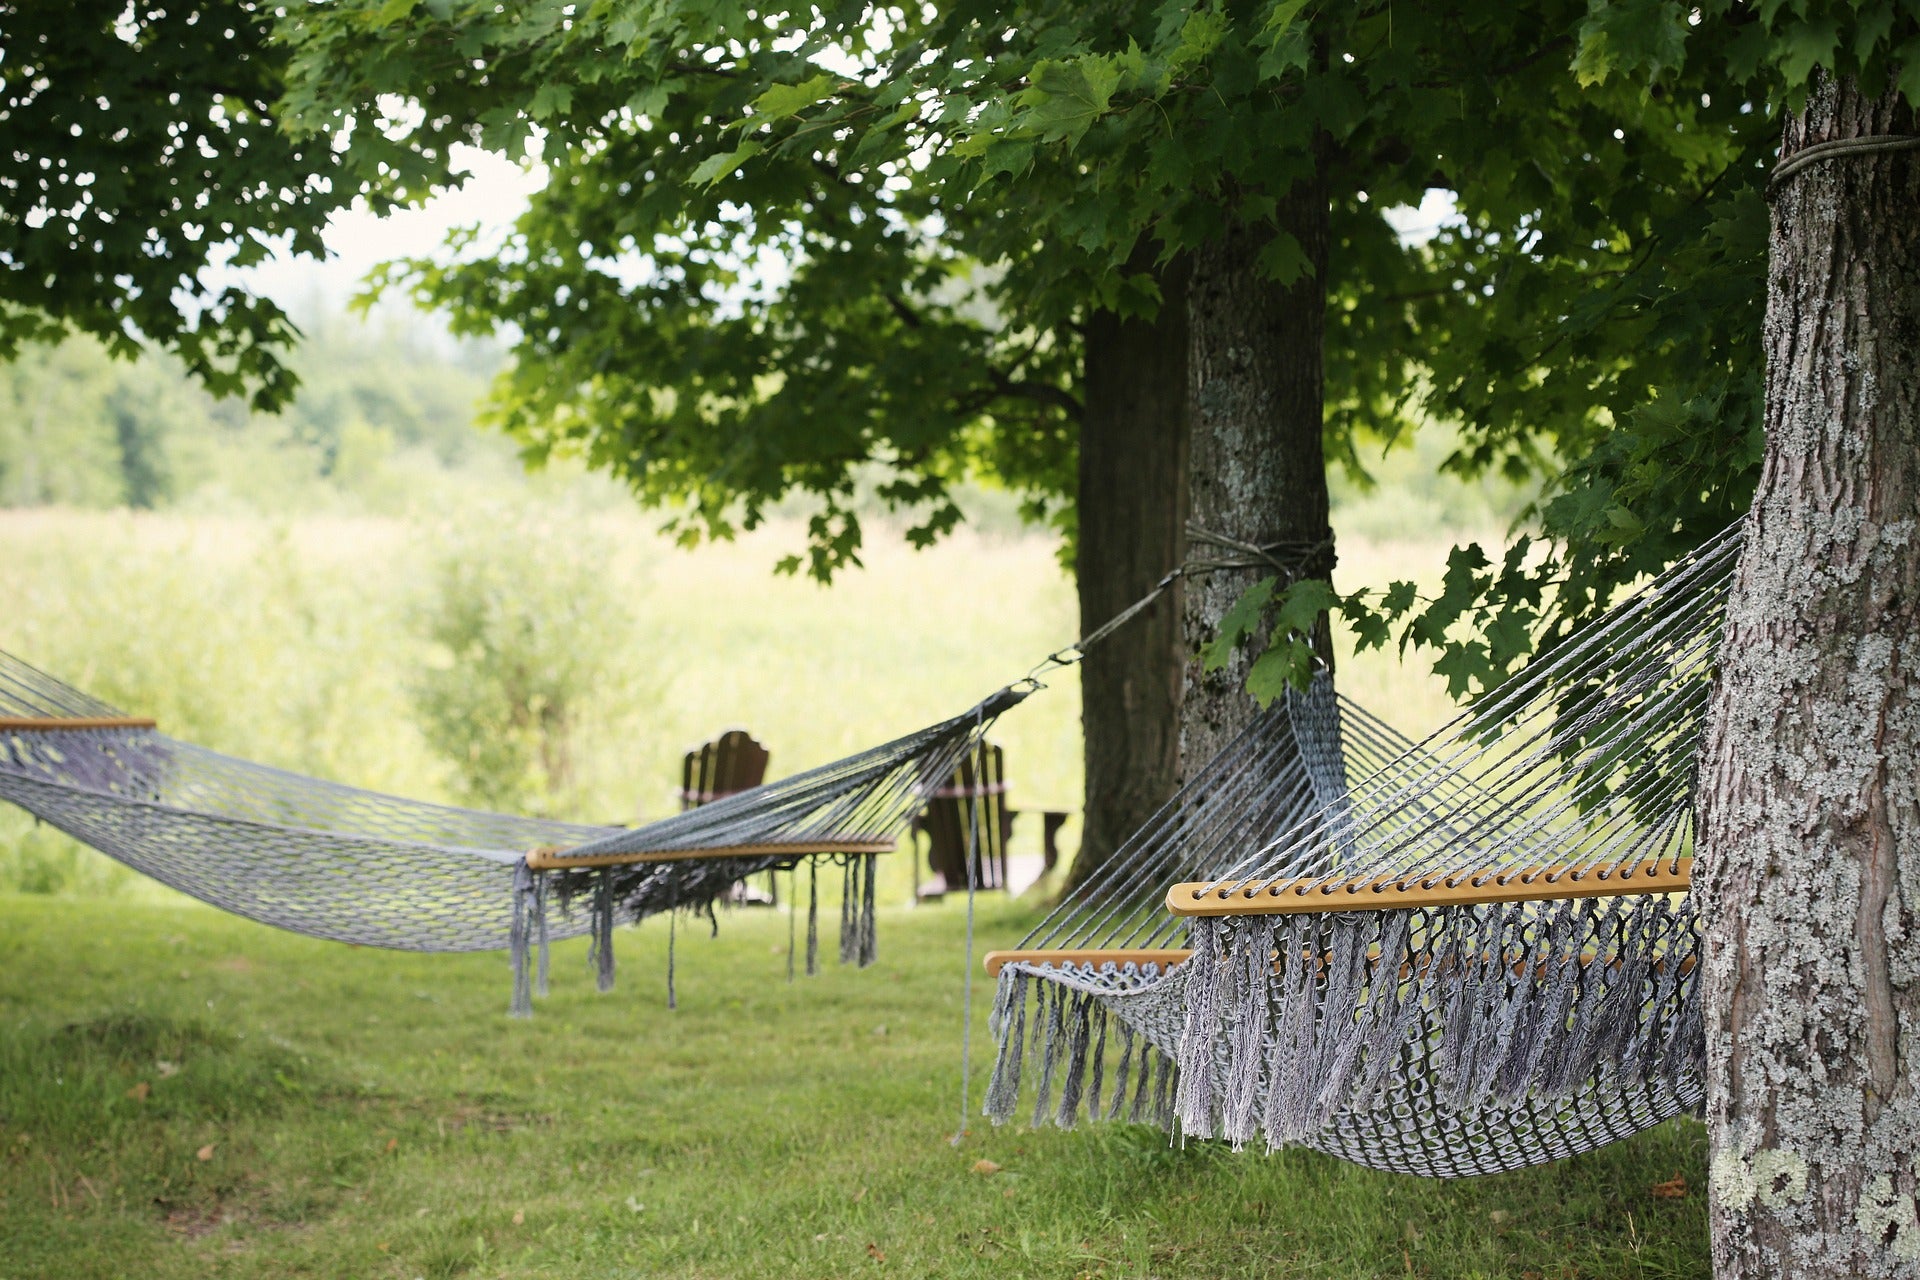 6 Amazing Ideas of Using a Hammock for your Outdoor Getaway or Camping Trip